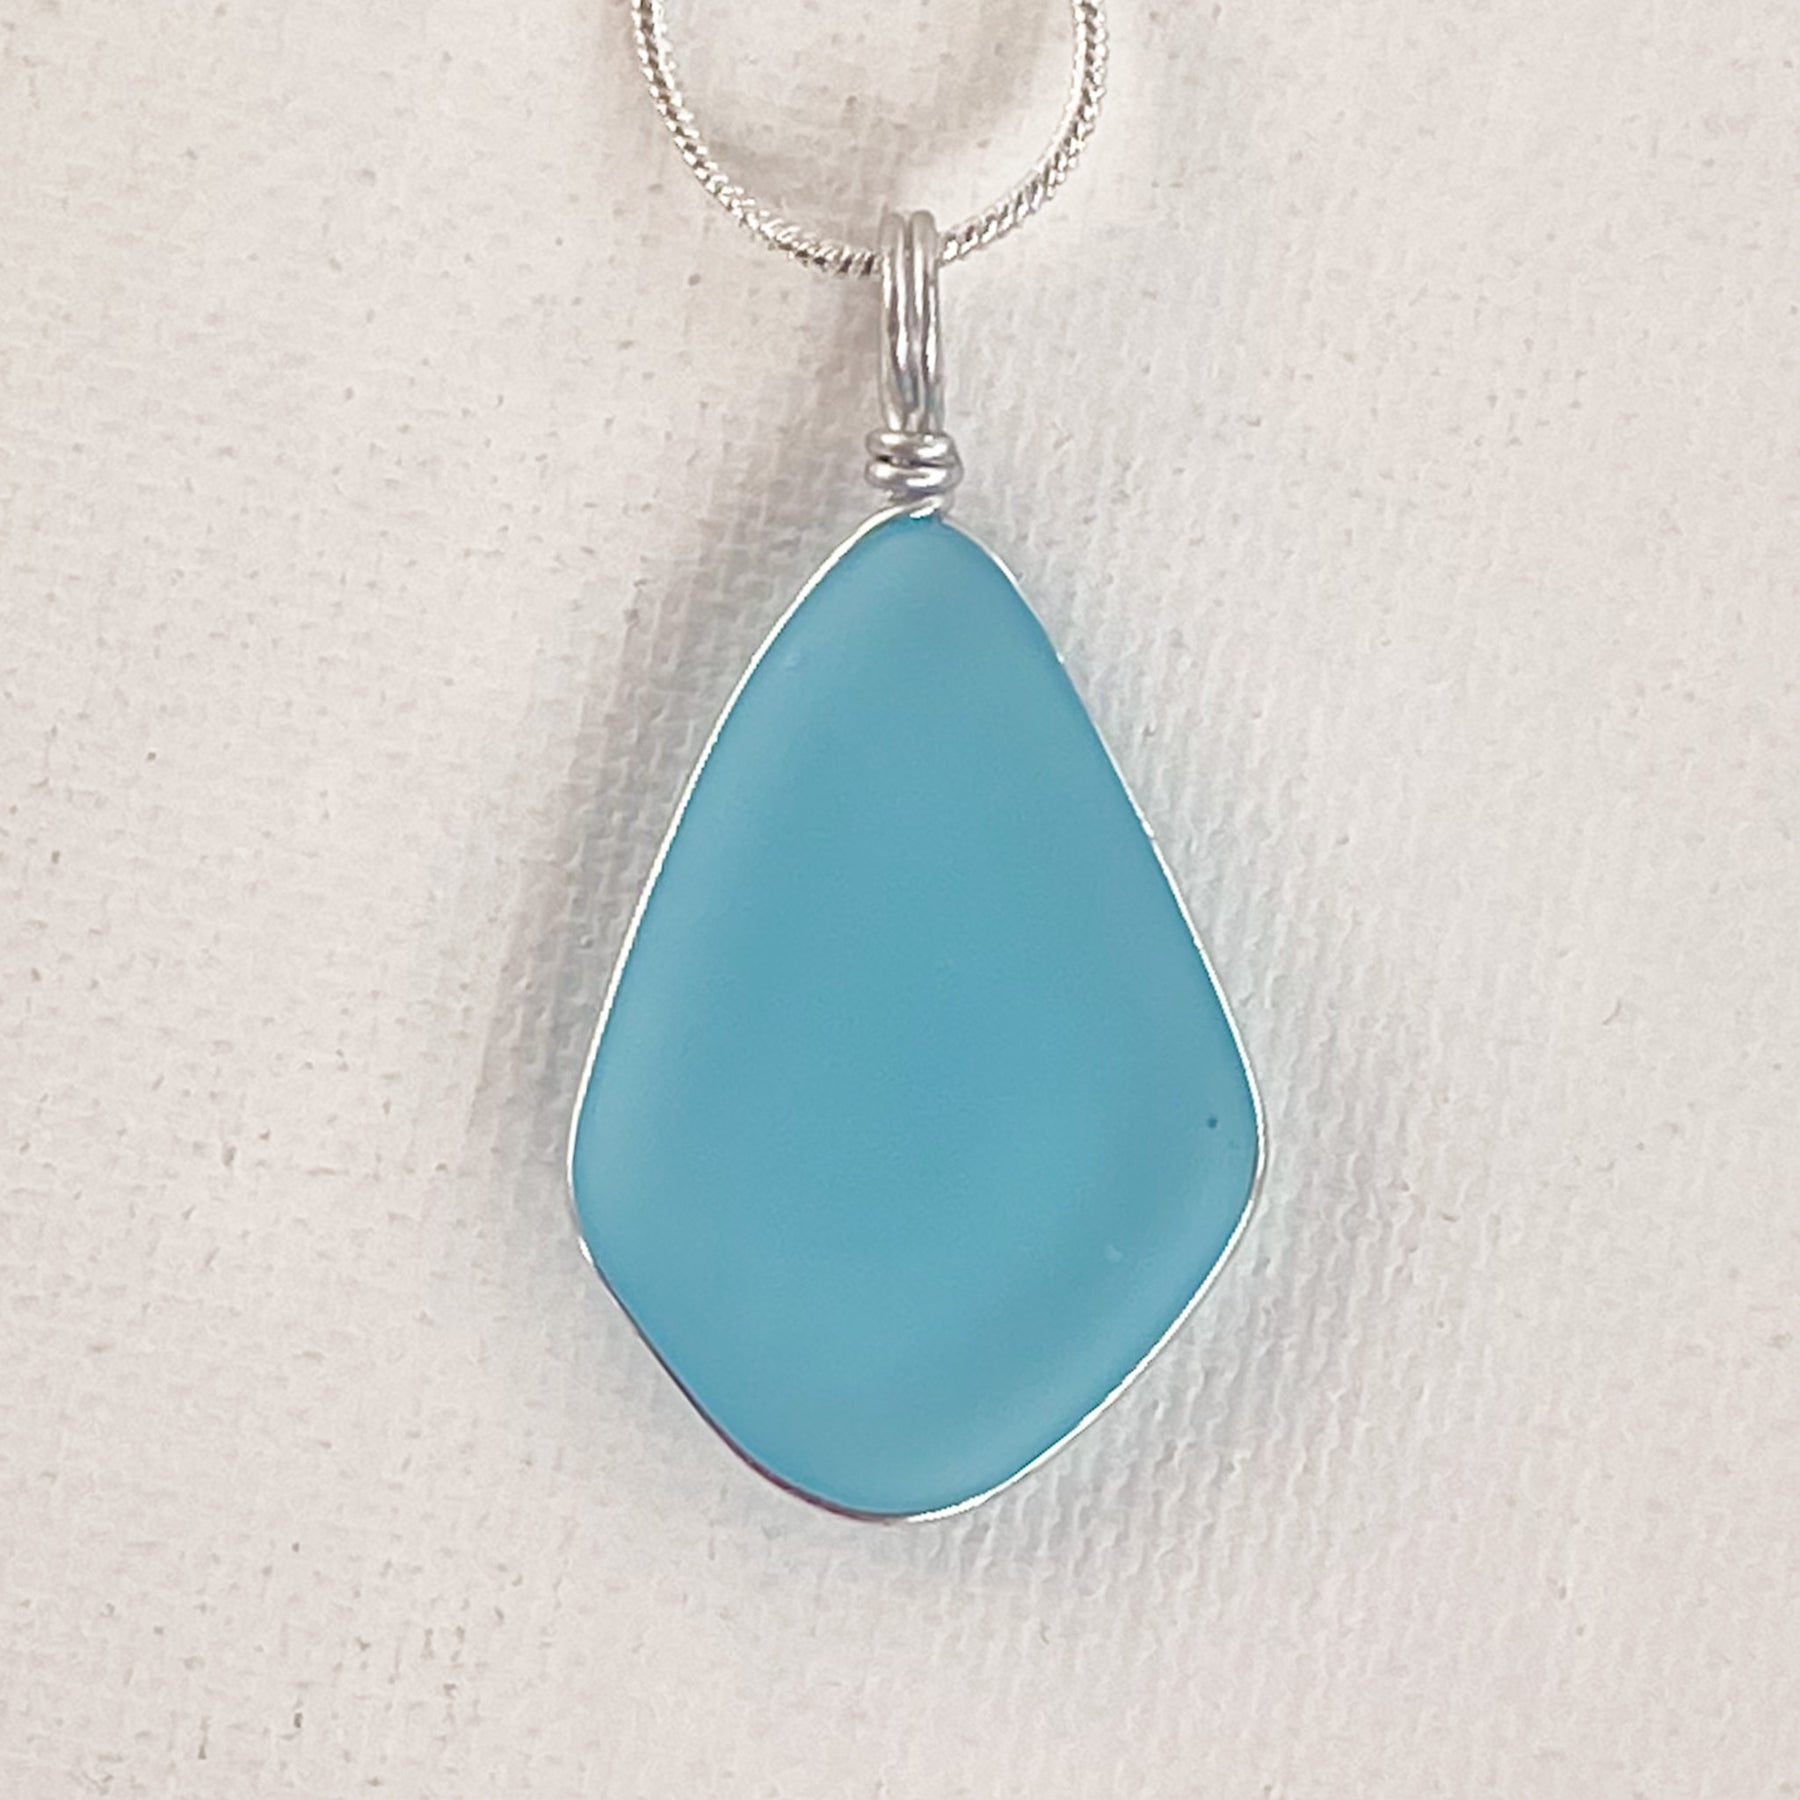 CALM Light Turquoise Large Trapezoid Sea Glass Necklace